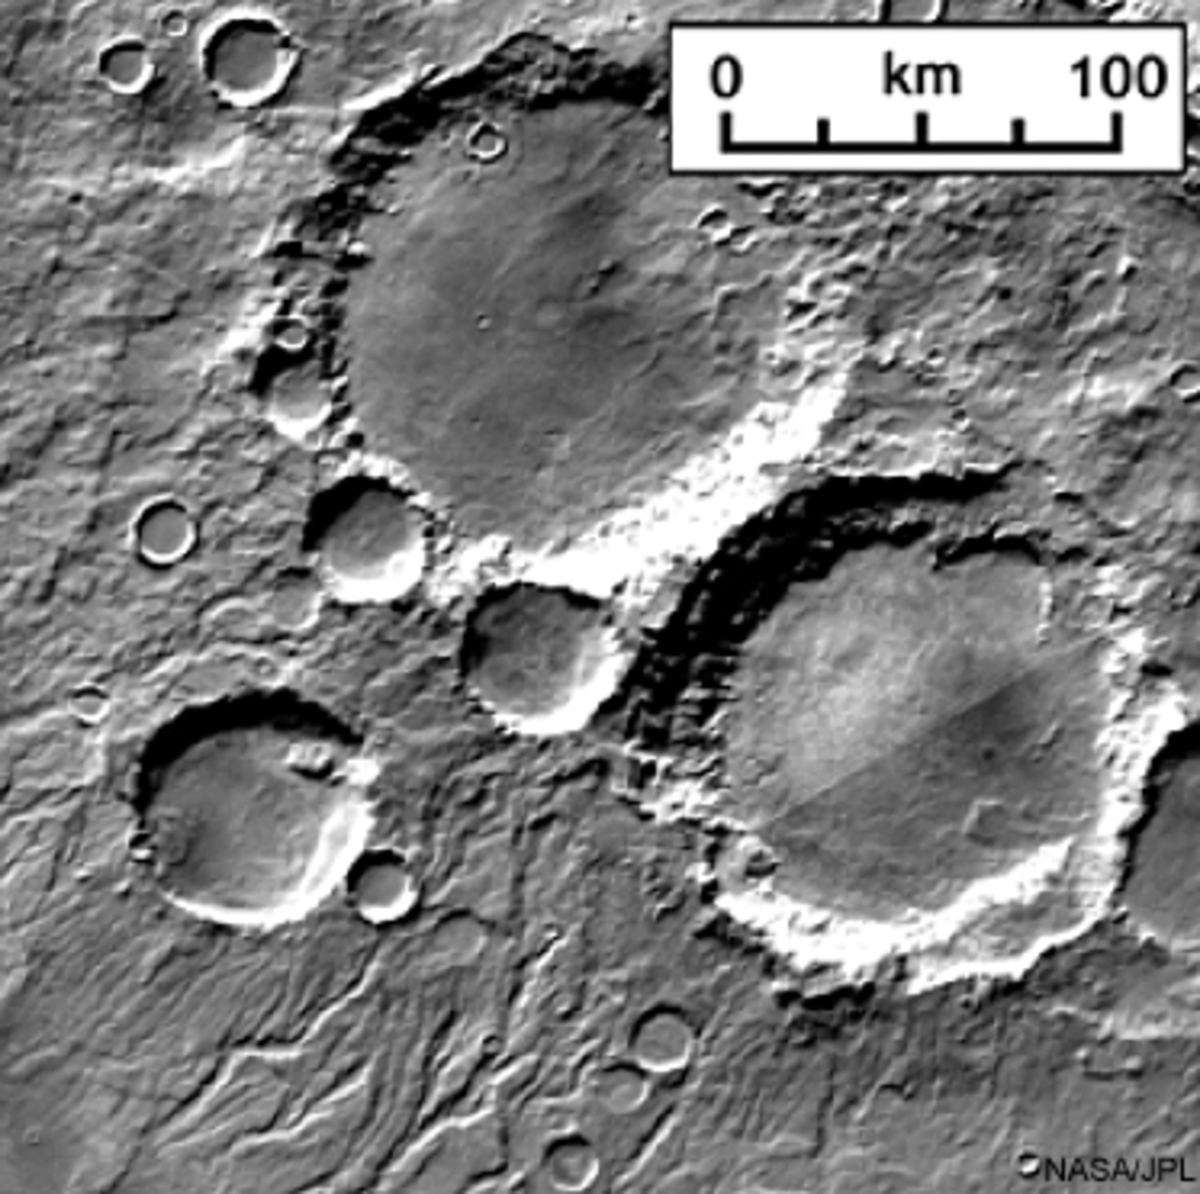 This photo of Mars shows craters and craters within craters along with evidence of water flow. Mars is close to the asteroid belt, so encounters are to be expected. The moon is also riddled with craters.